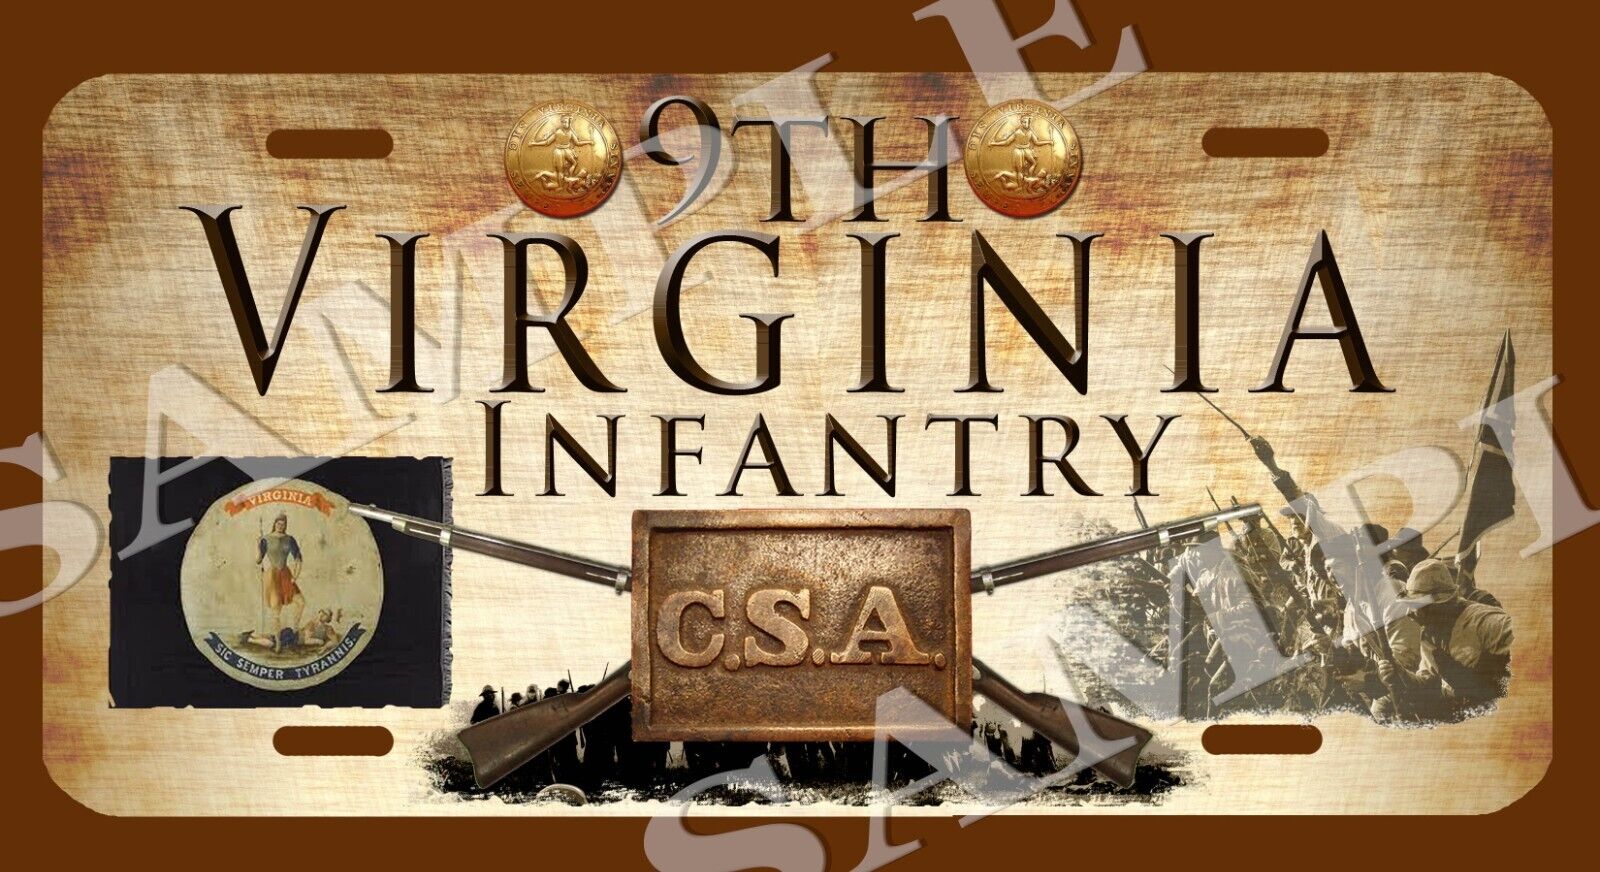 9th Virginia Infantry American Civil War Themed vehicle license plate